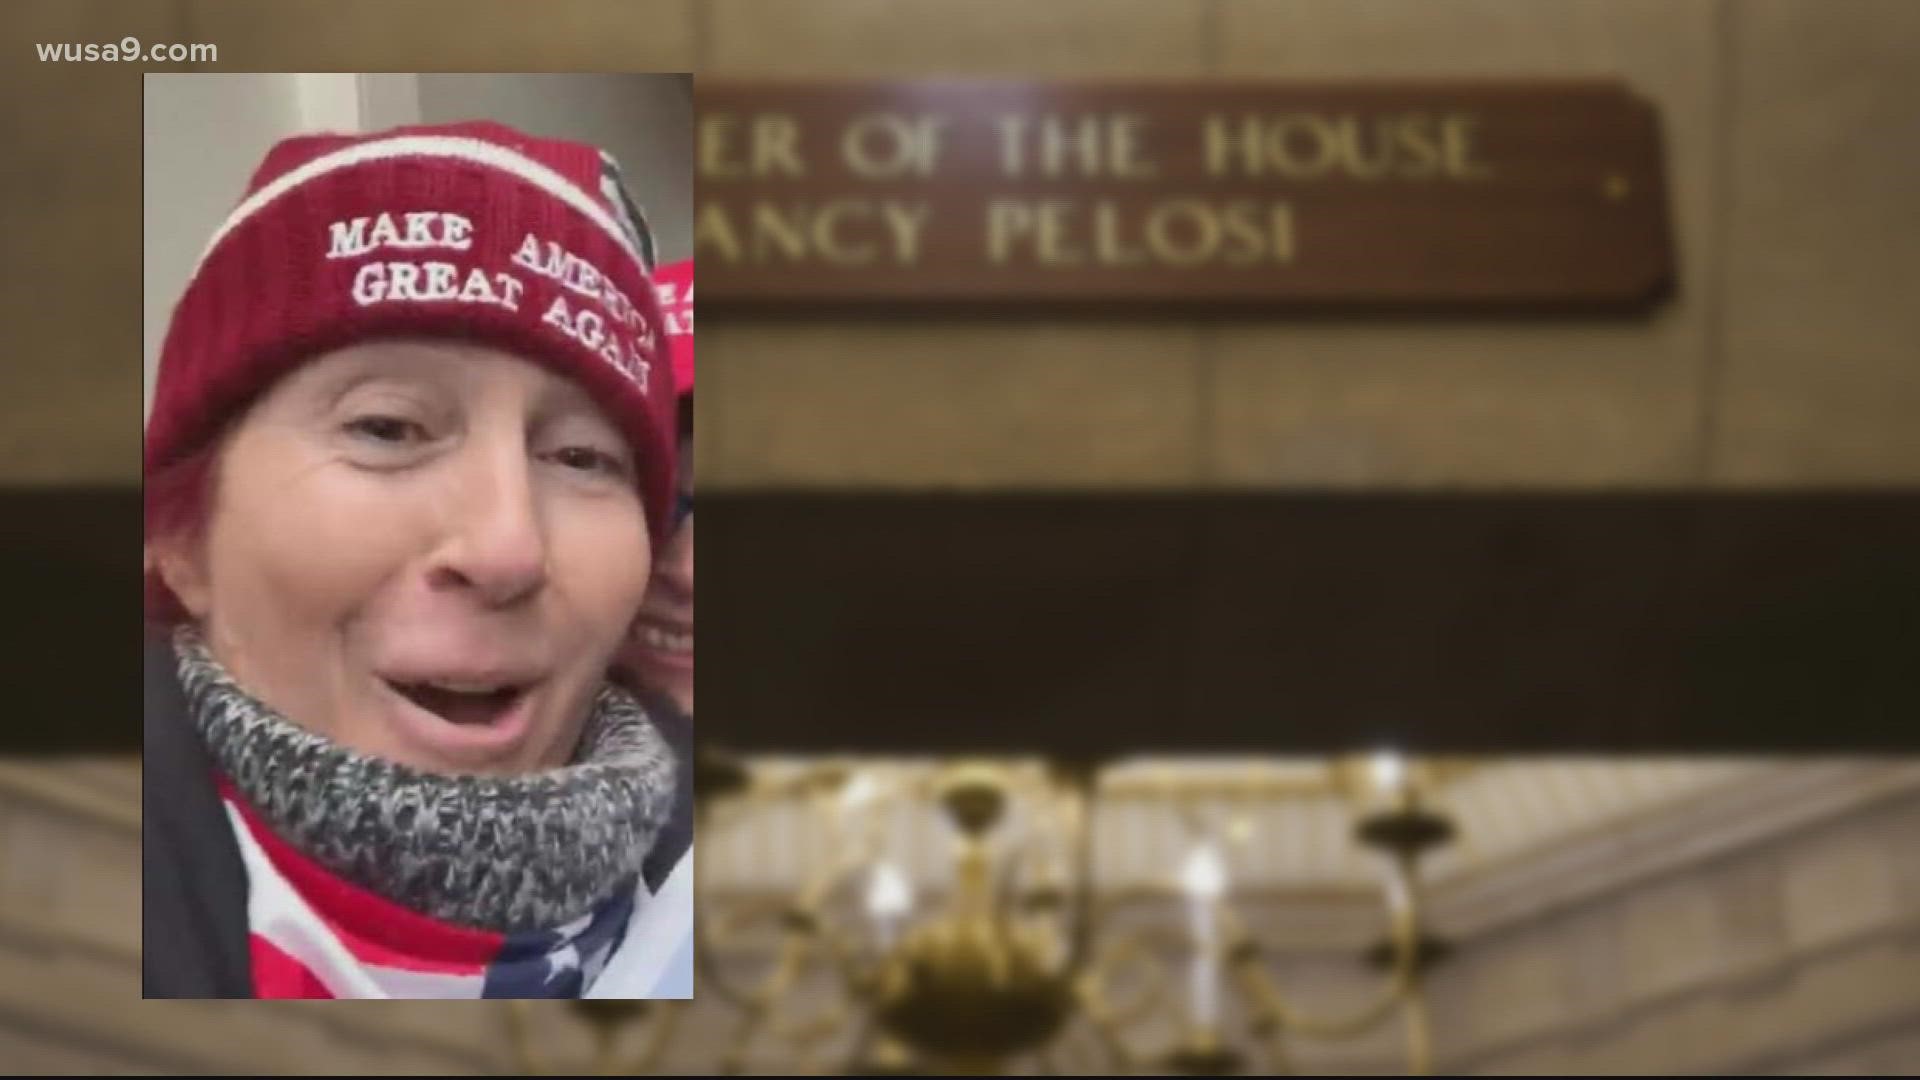 Dawn Bancroft pleaded guilty to one misdemeanor count of parading on Tuesday, despite a video in which she said she wanted to shoot Pelosi "in the friggin' brain."